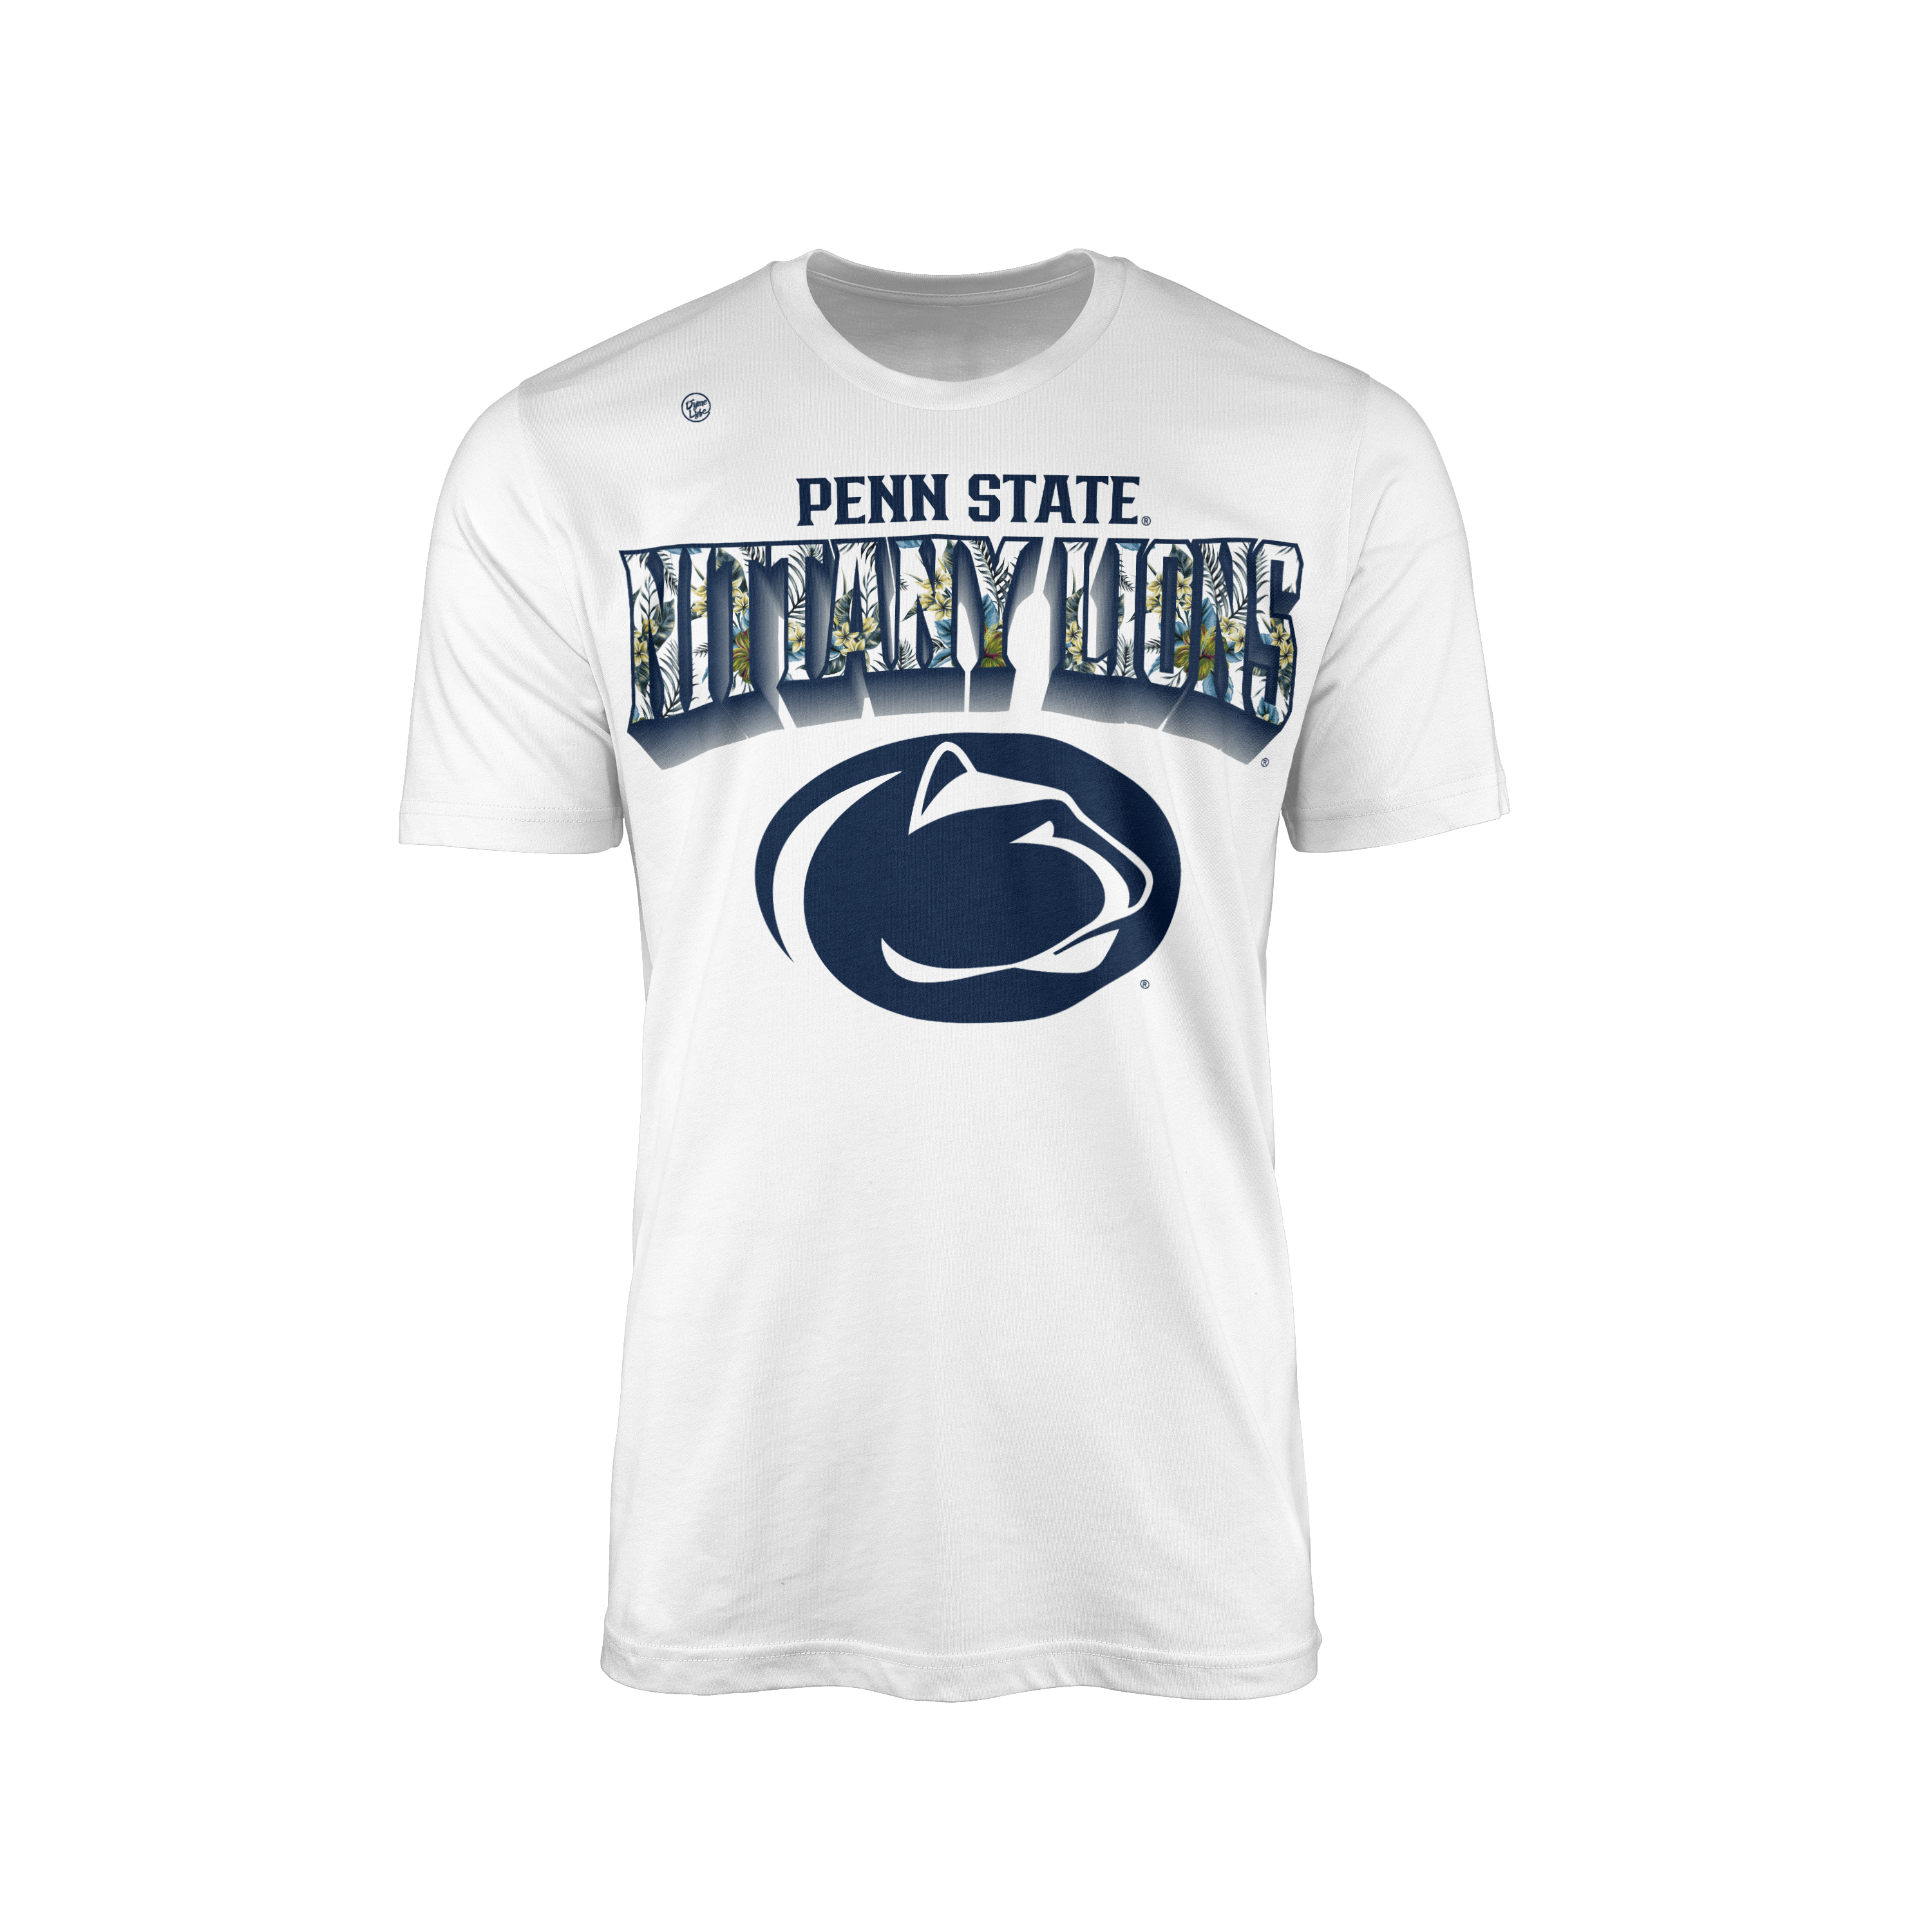 Penn State Nittany Lions Men’s Floral Team Tee